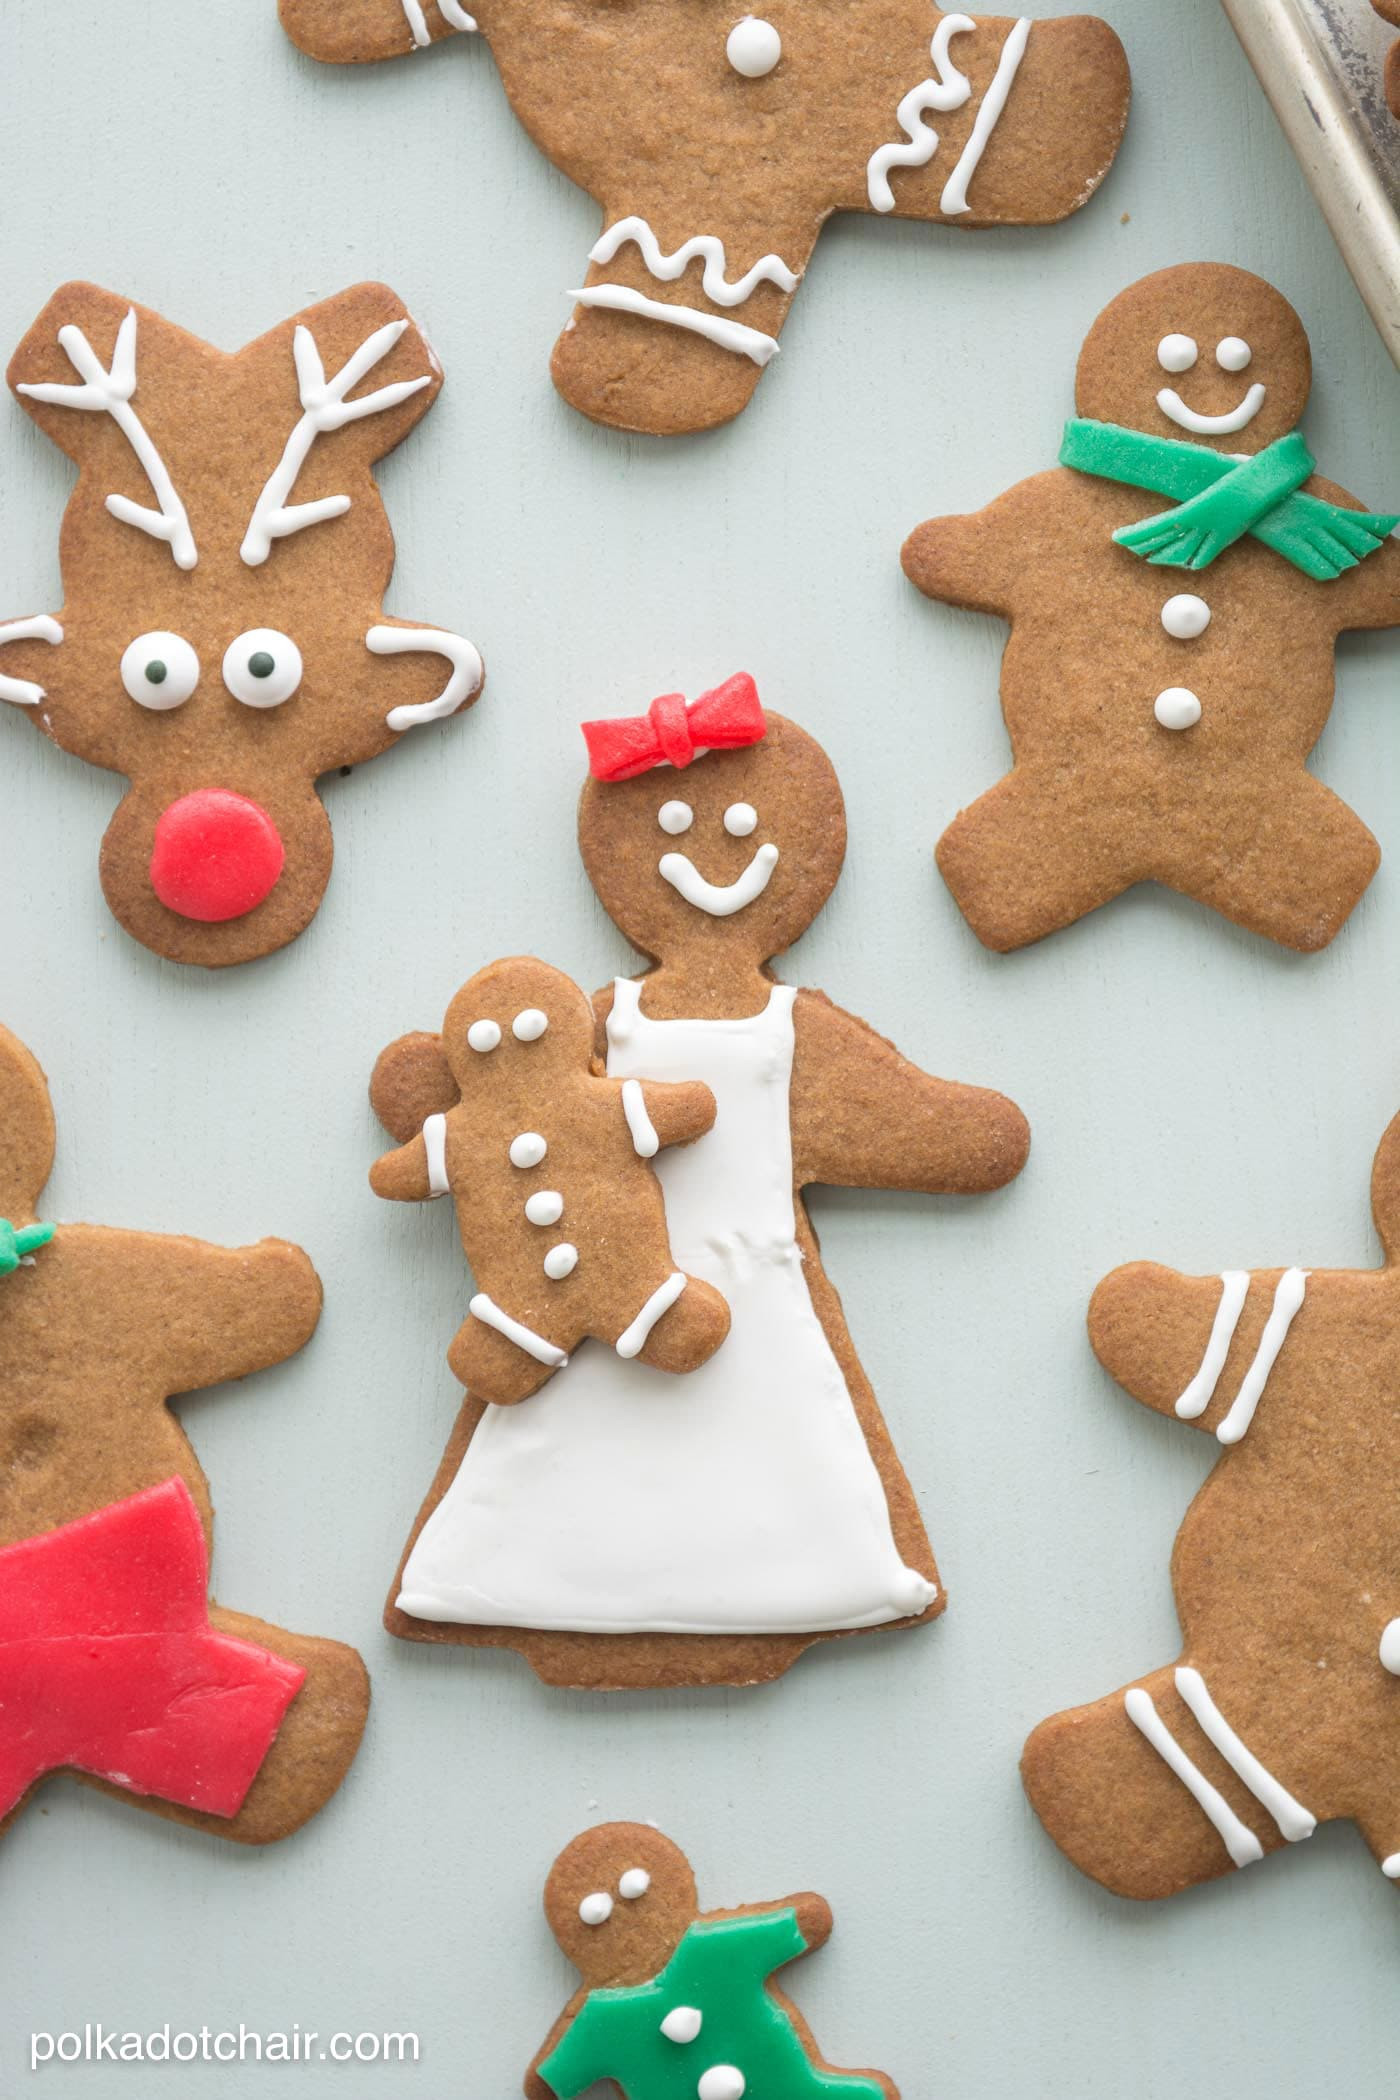 Gingerbread Christmas Cookies
 Gingerbread Cookie Decorating Ideas The Polka Dot Chair